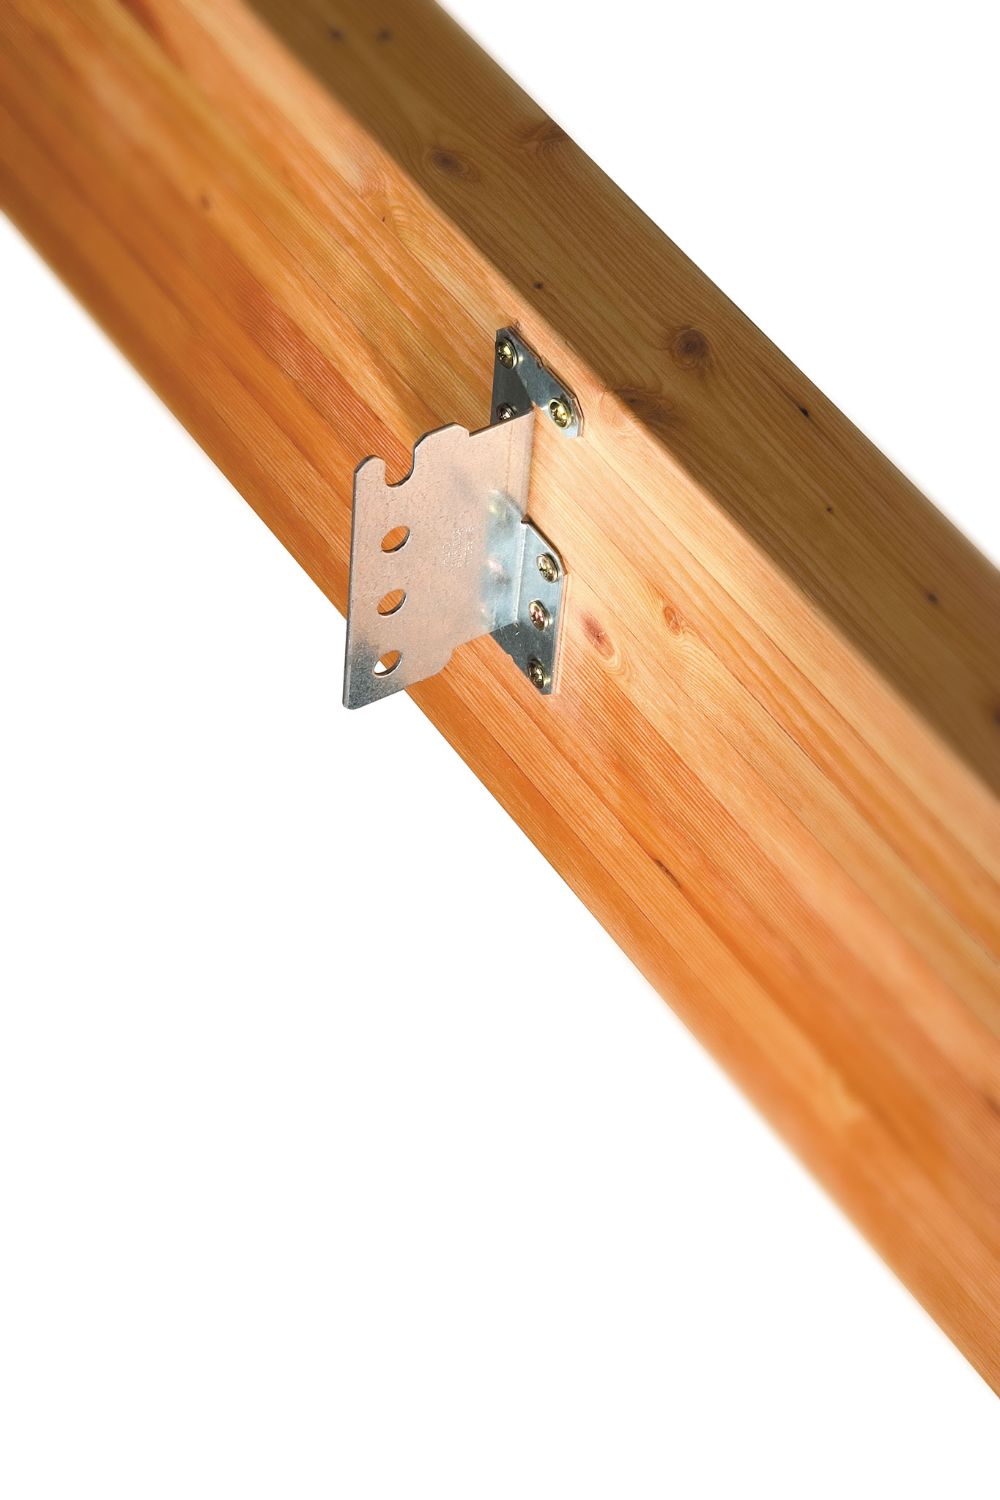 Simpson CJT4ZS Concealed Joist Tie w Short Pins ZMAX Finish image 2 of 5